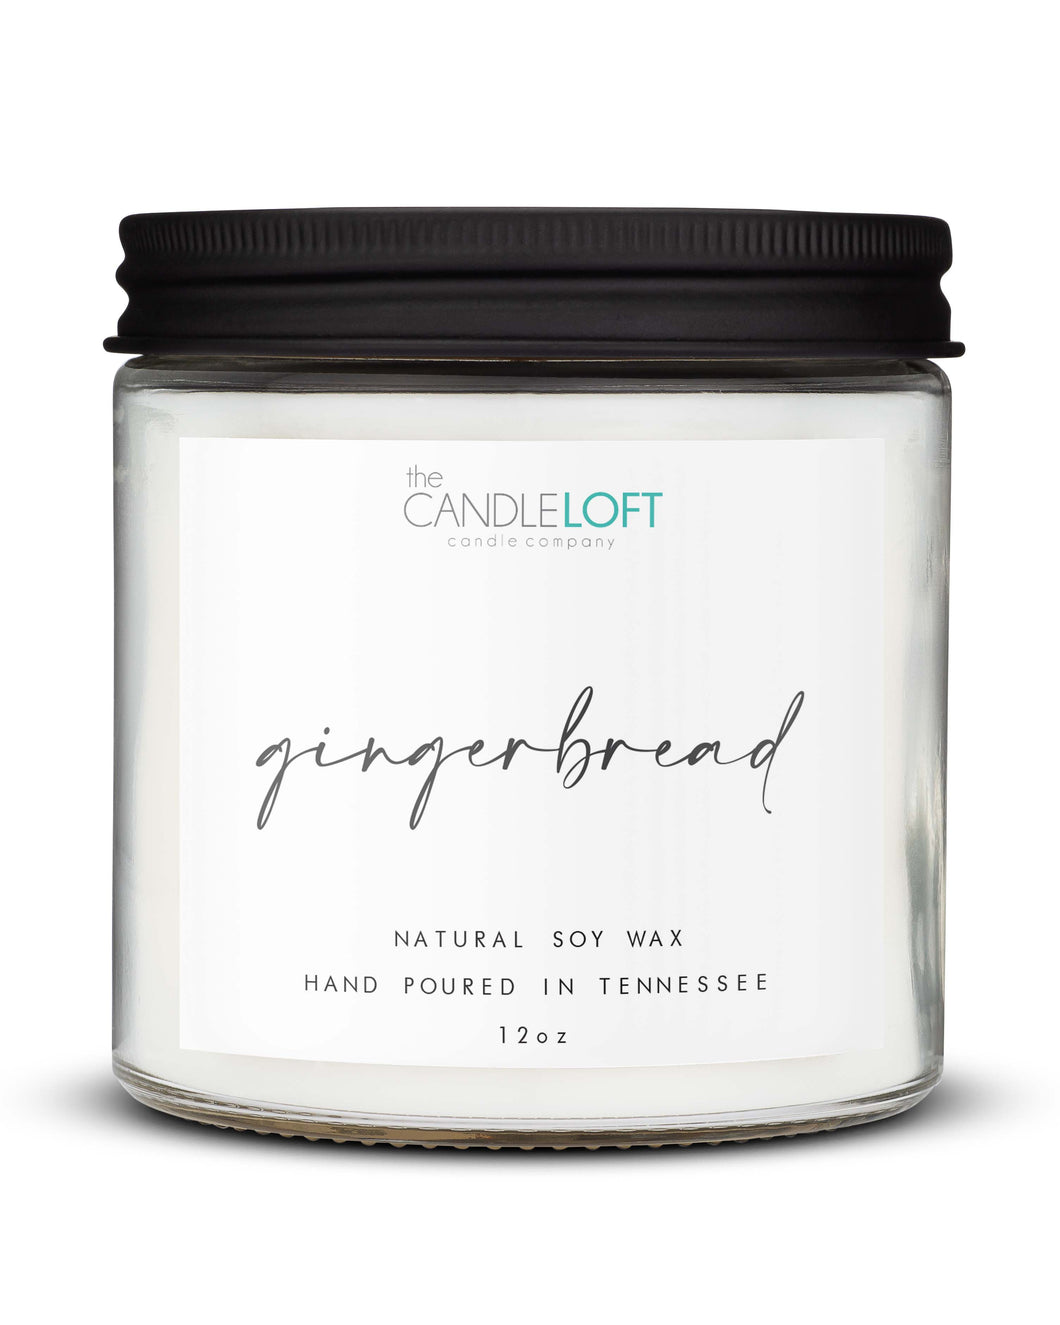 The Candle Loft Candles Signature 12oz Gingerbread Candle